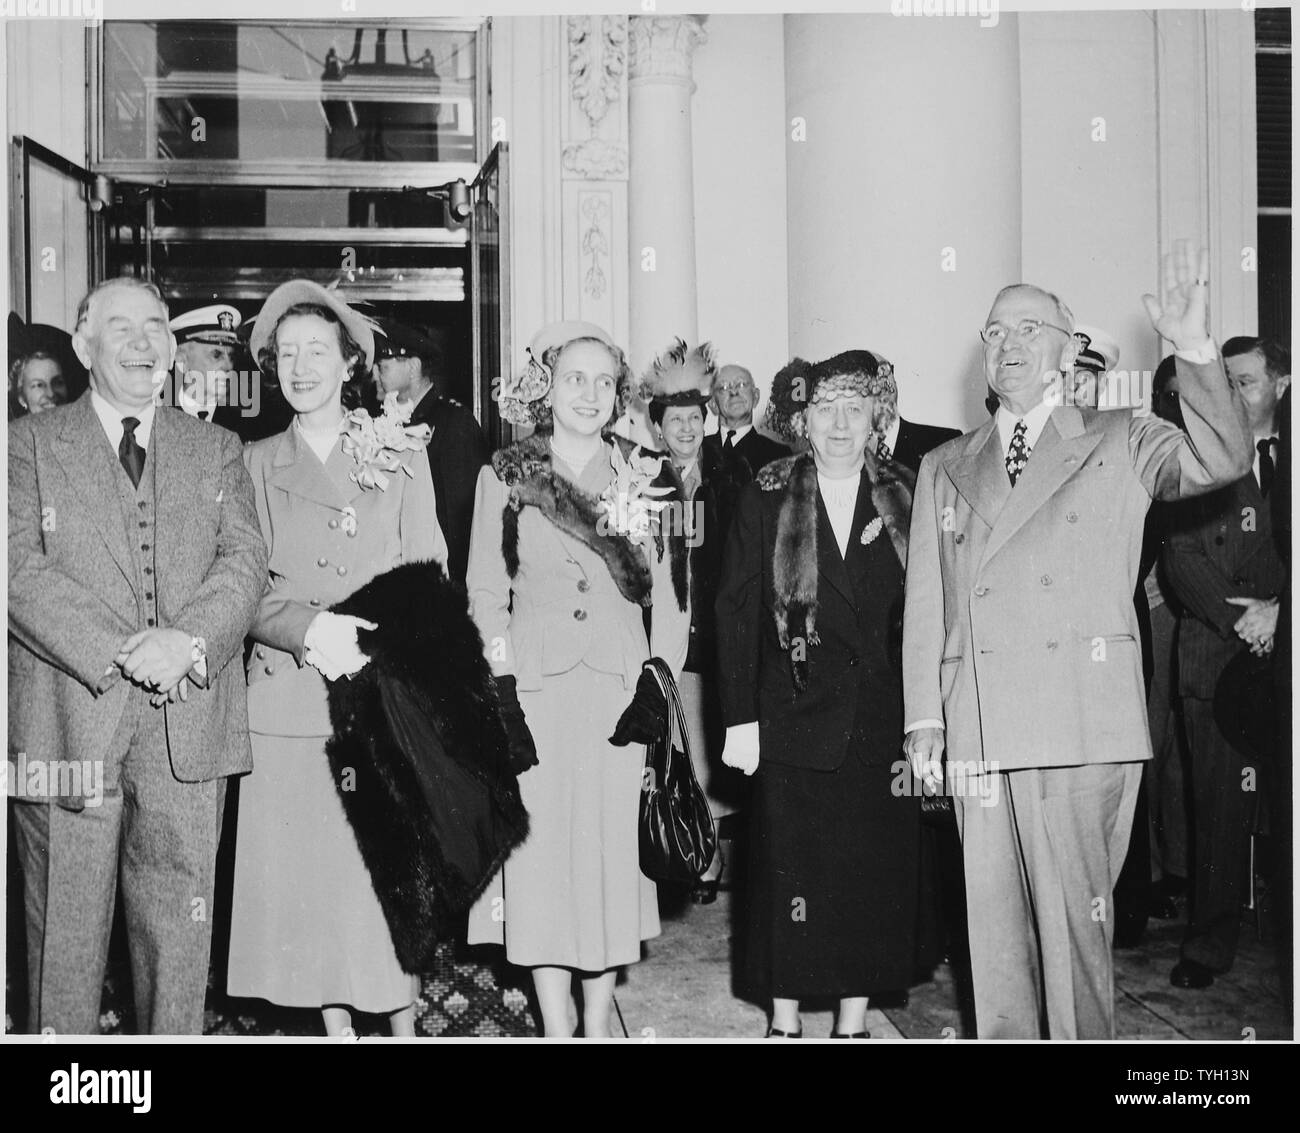 President and Mrs. Harry S. Truman, Vice President-elect Alben W. Barkley and Mrs. Max Truitt, and Margaret Truman standing on the front porch of the White House, with other standing behind them. Truman is waving. Truman and Barkley had just returned to Washington, DC after their victory in the 1948 election. Stock Photo